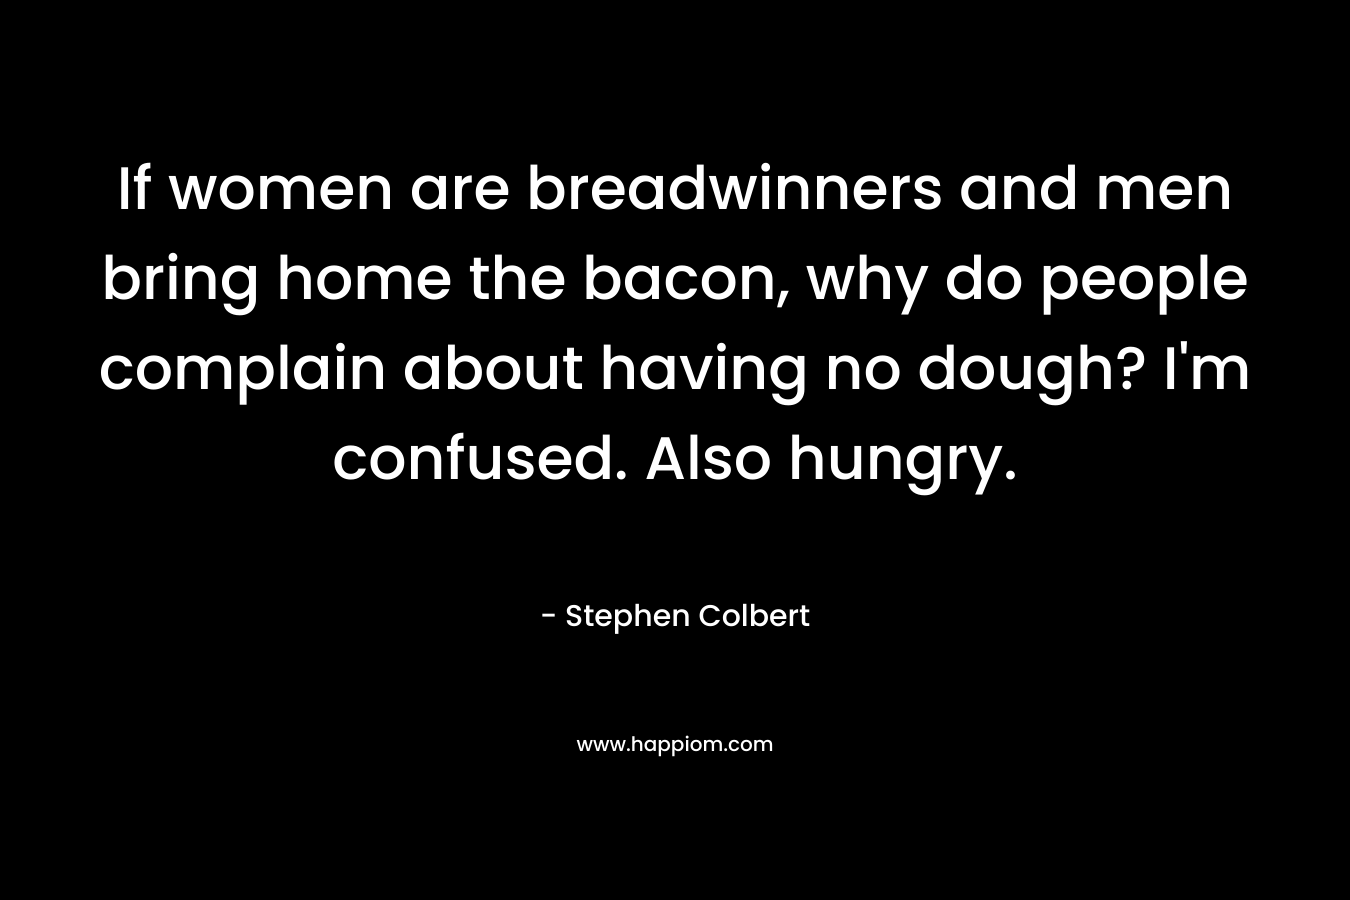 If women are breadwinners and men bring home the bacon, why do people complain about having no dough? I’m confused. Also hungry. – Stephen Colbert